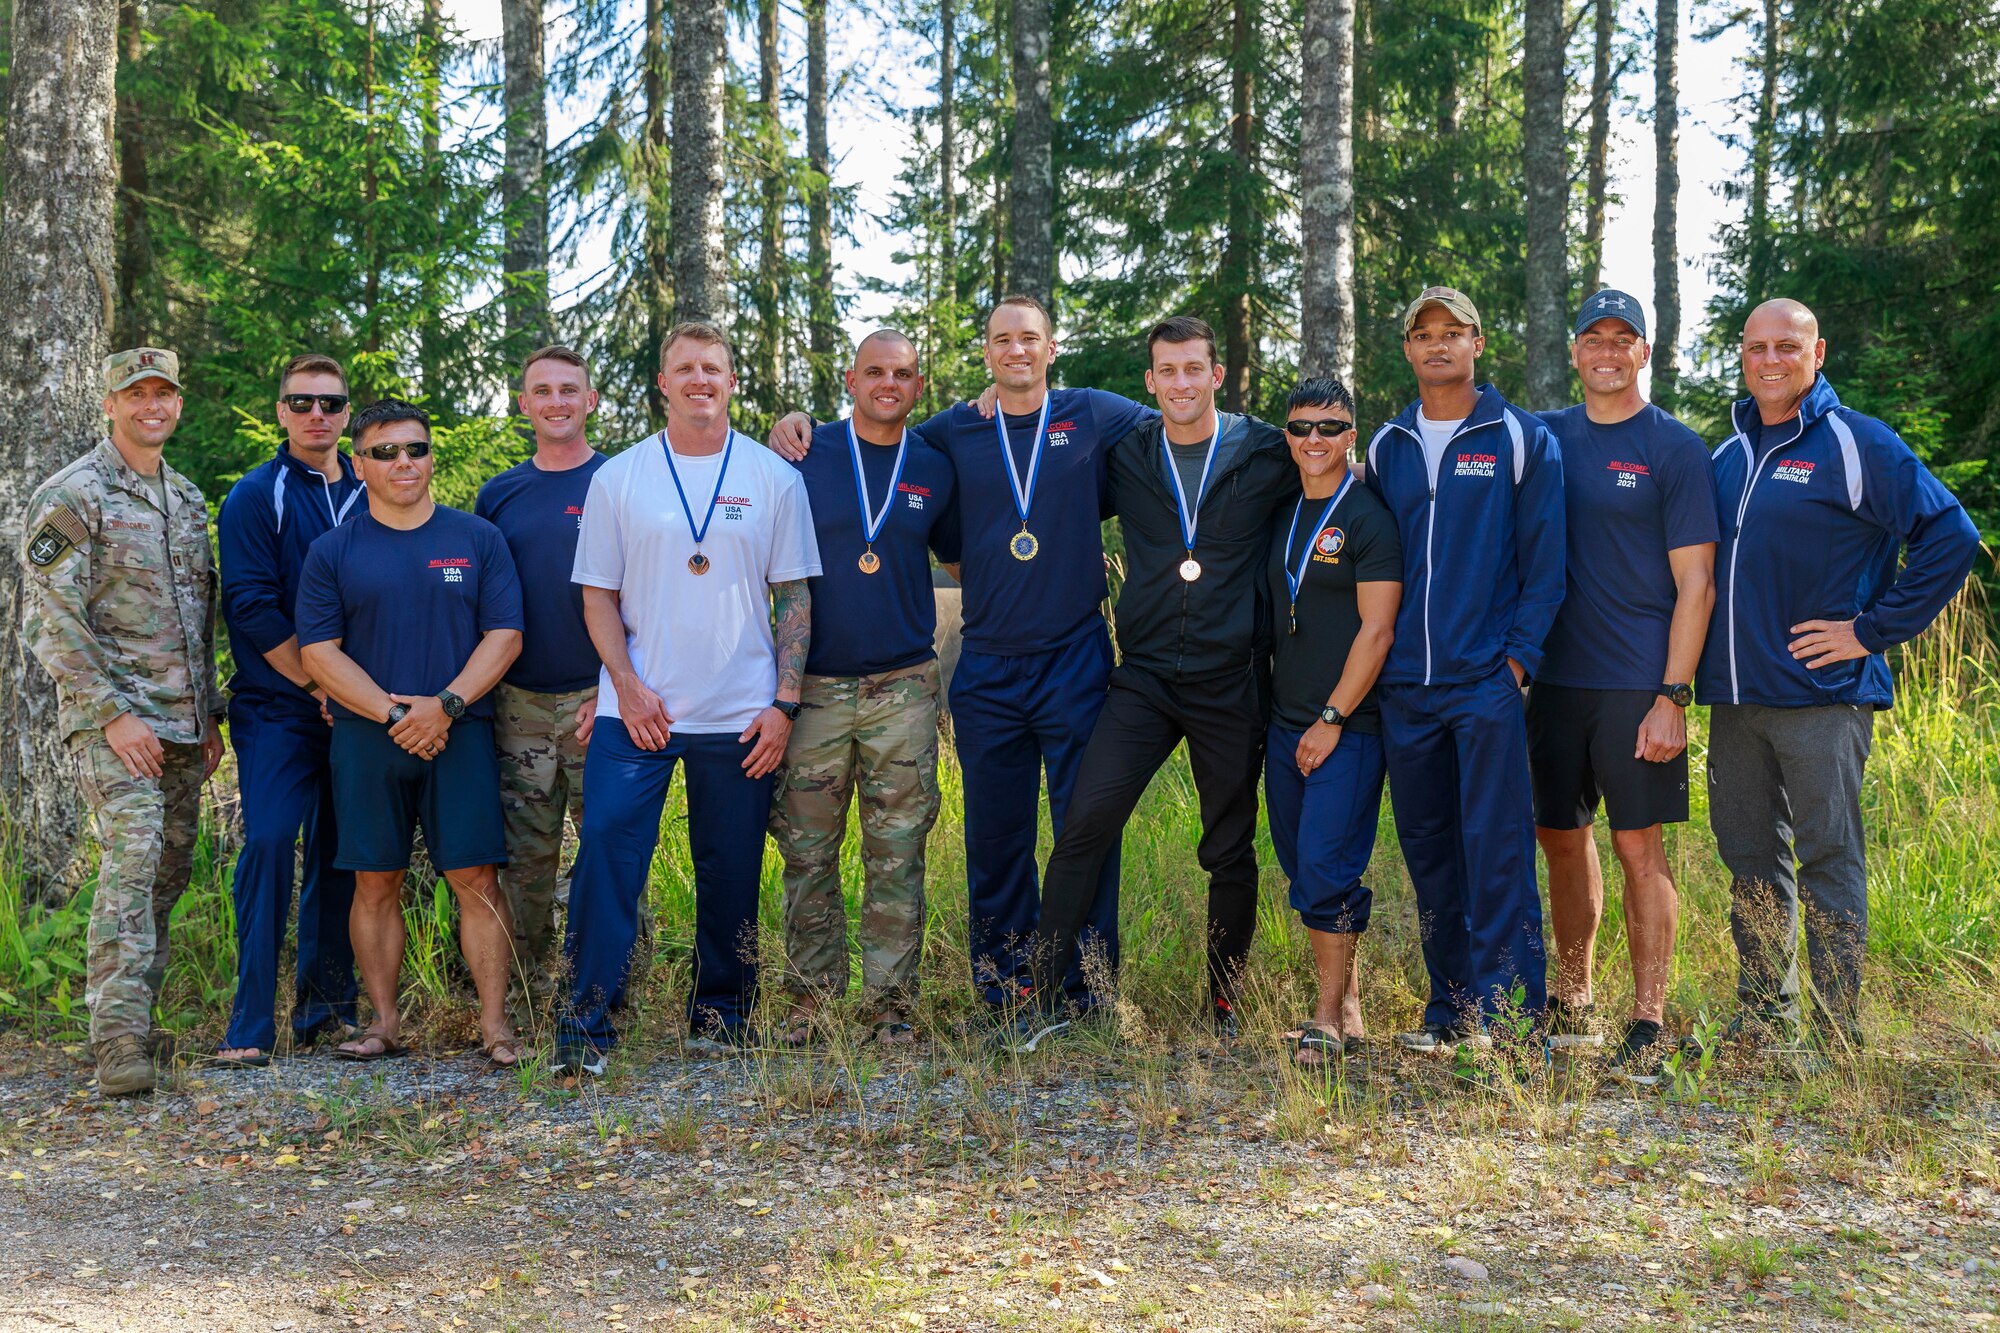 Team USA poses for a picture after the the closing ceremony in Lahti, Finland on August 1st. This team was composed of reserve service members from three nations, Finland, Denmark and the United States of America. The CIOR MILCOMP is an annual competition among NATO and Partnership for Peace nations. This competition test reserve service members from allied nations on several core disciplines in teams of three.